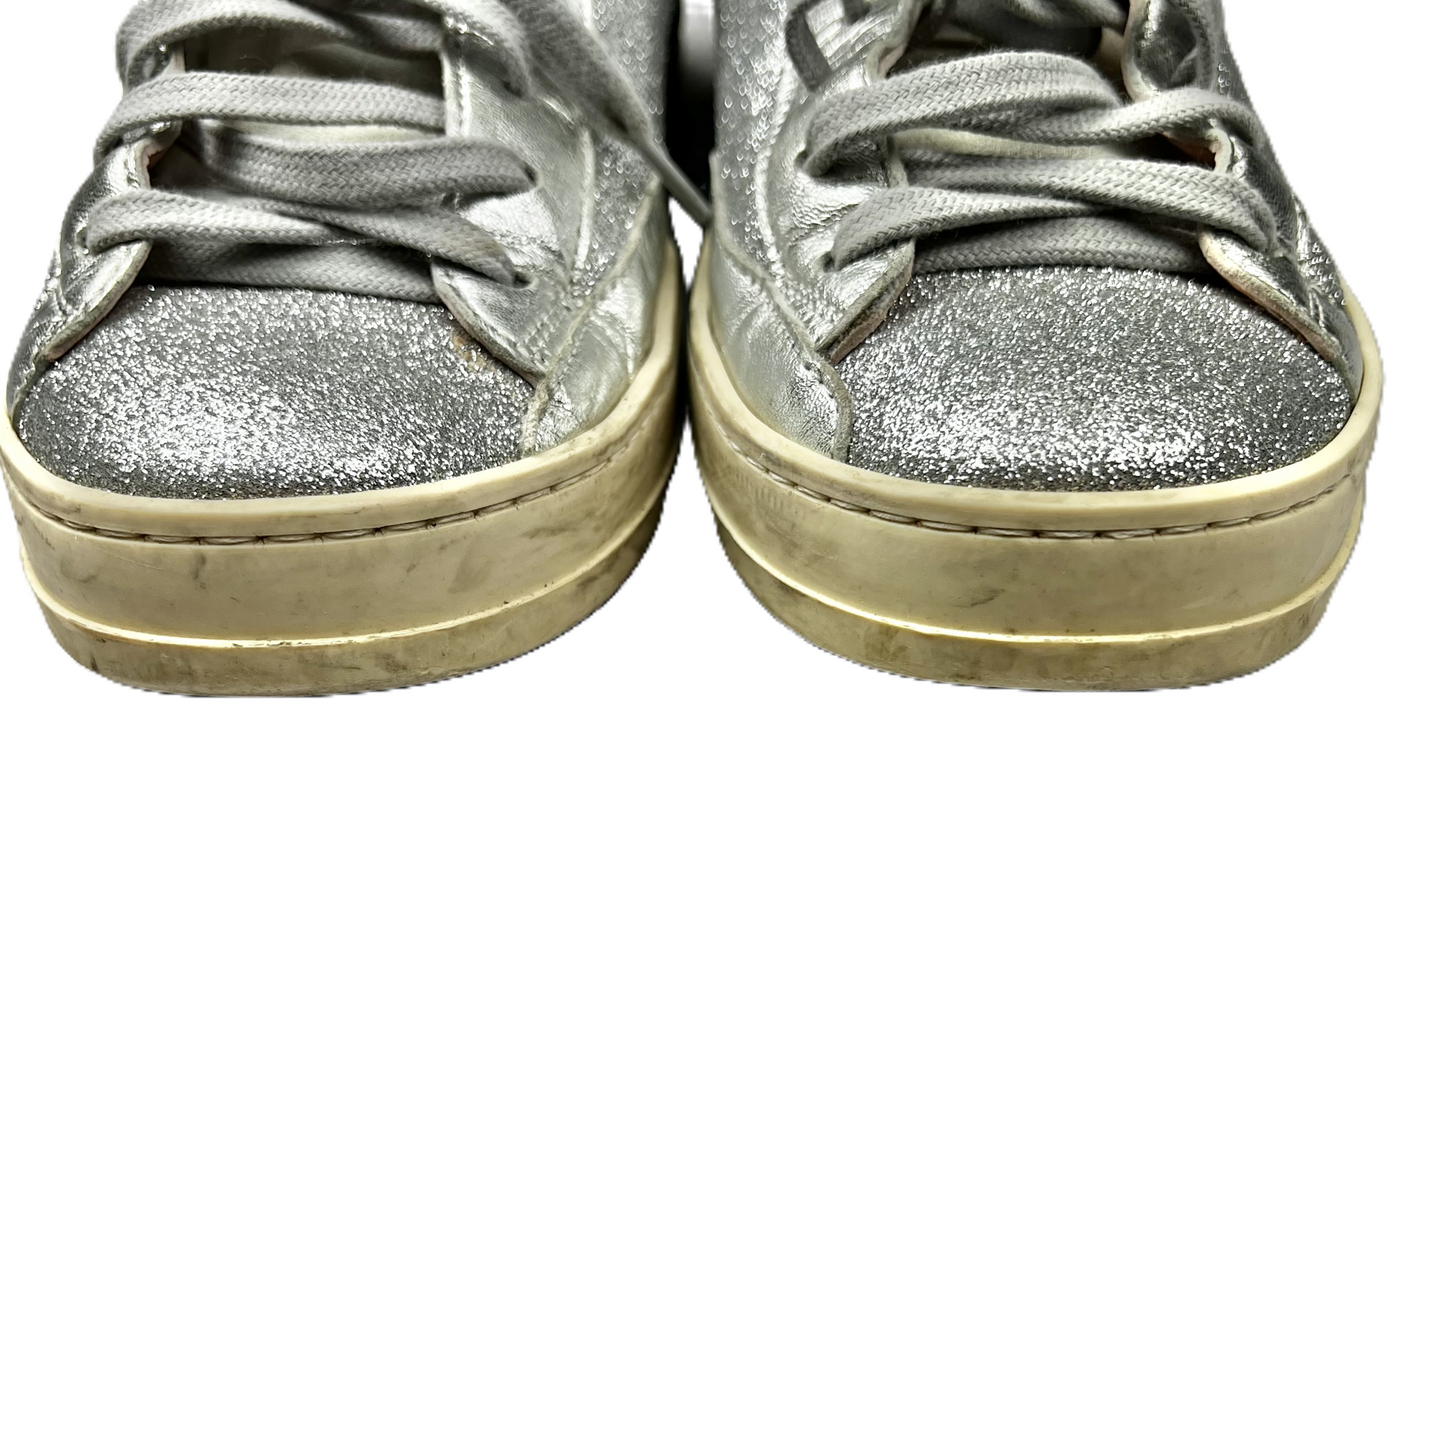 Silver Shoes Sneakers By P448, Size: 7.5